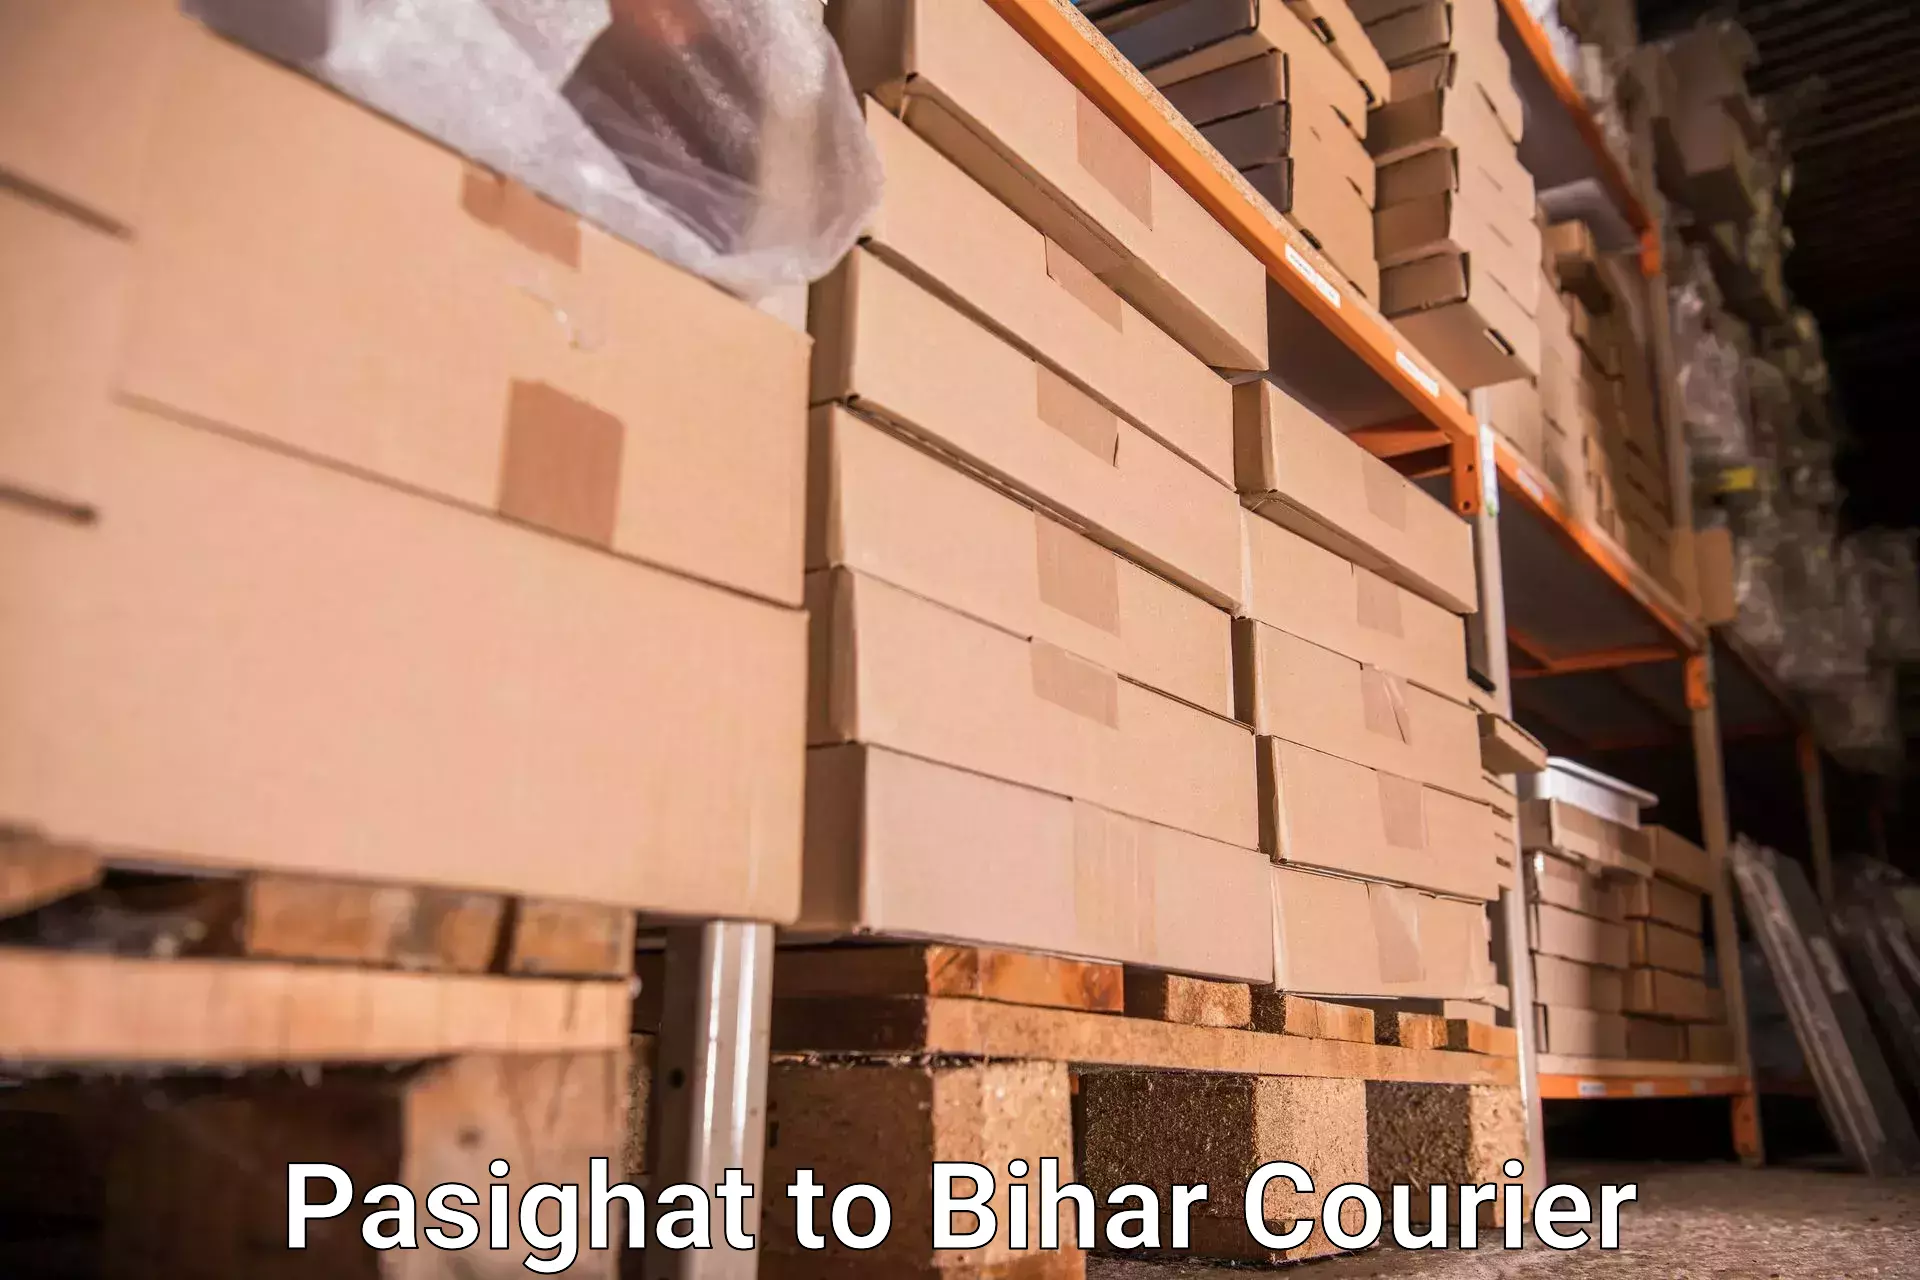 Luggage shipment specialists Pasighat to Rajpur